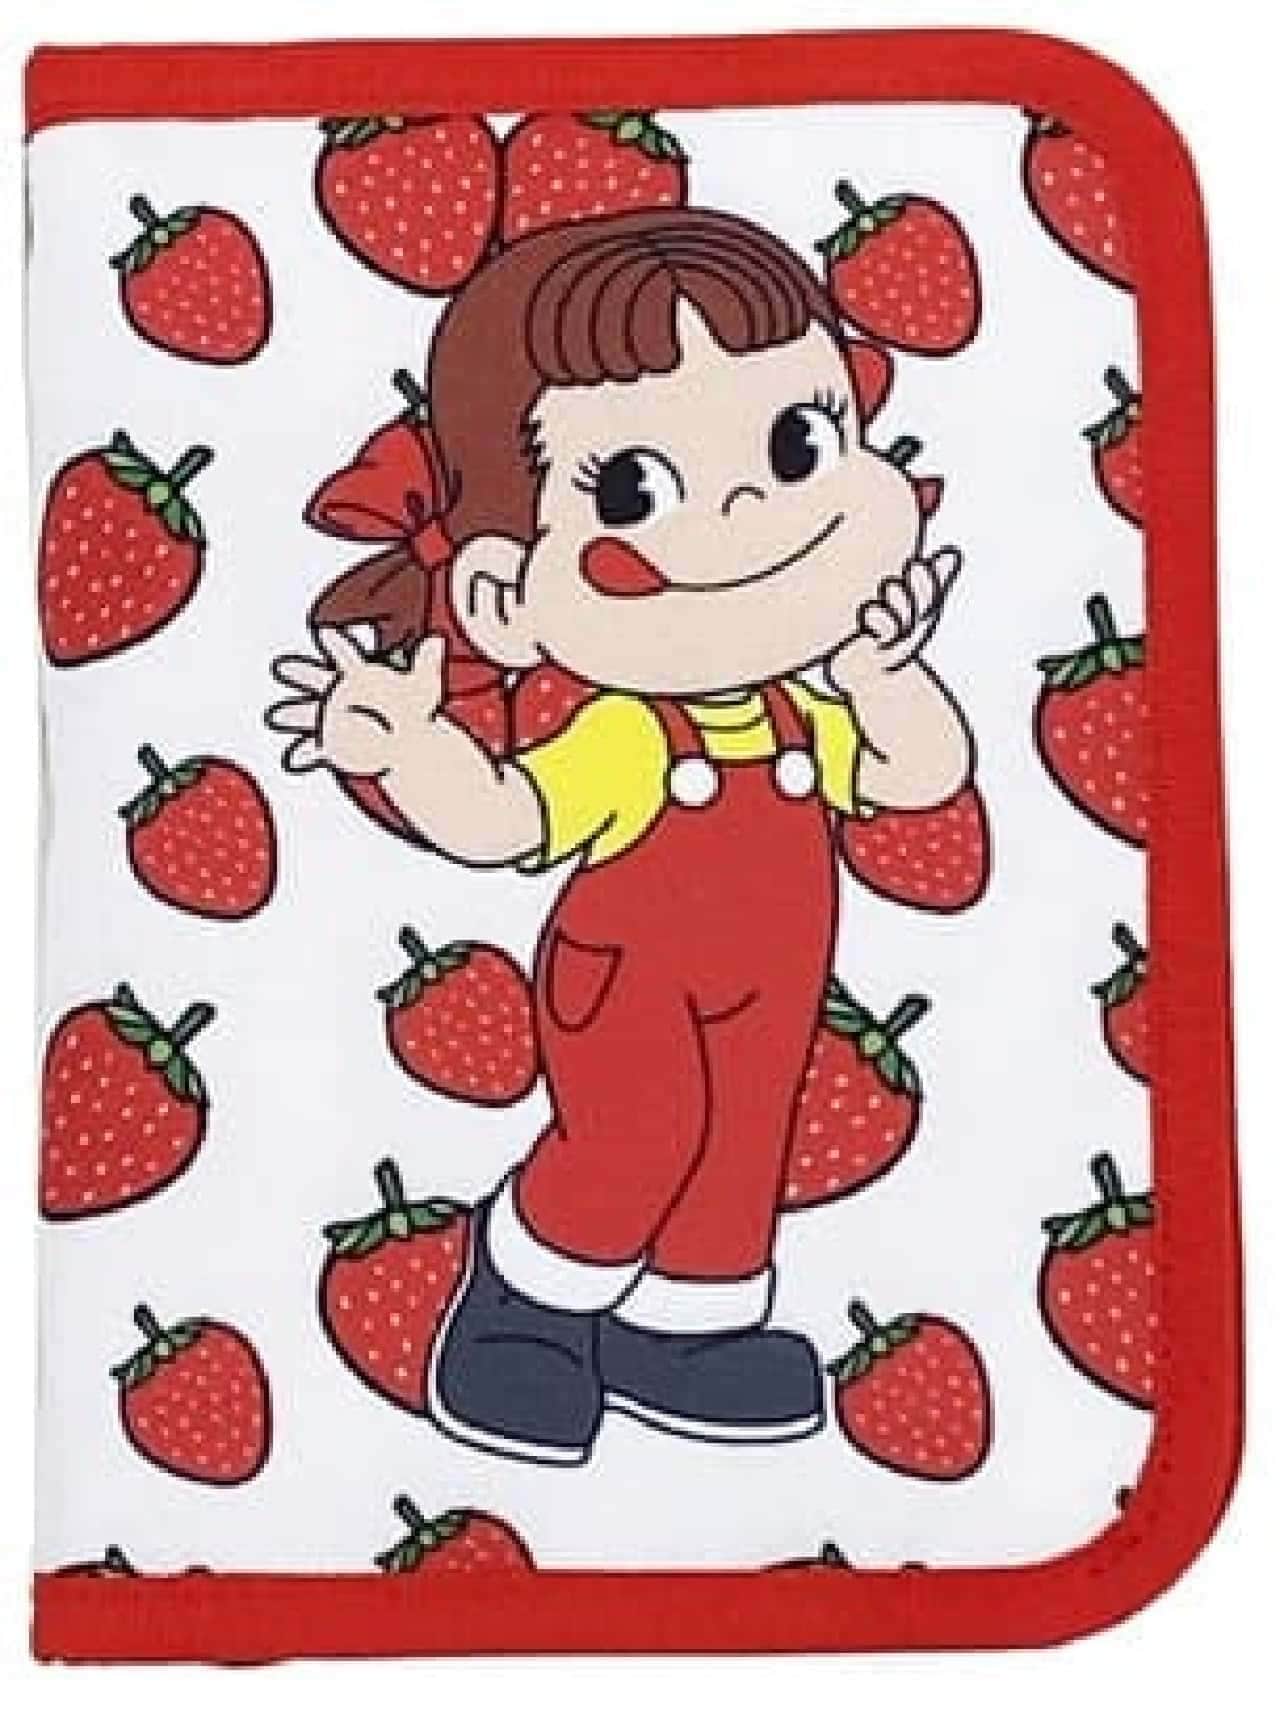 Post office "Peko-chan goods" released --Key pouch, multi-case, strawberry-shaped eco bag, etc.